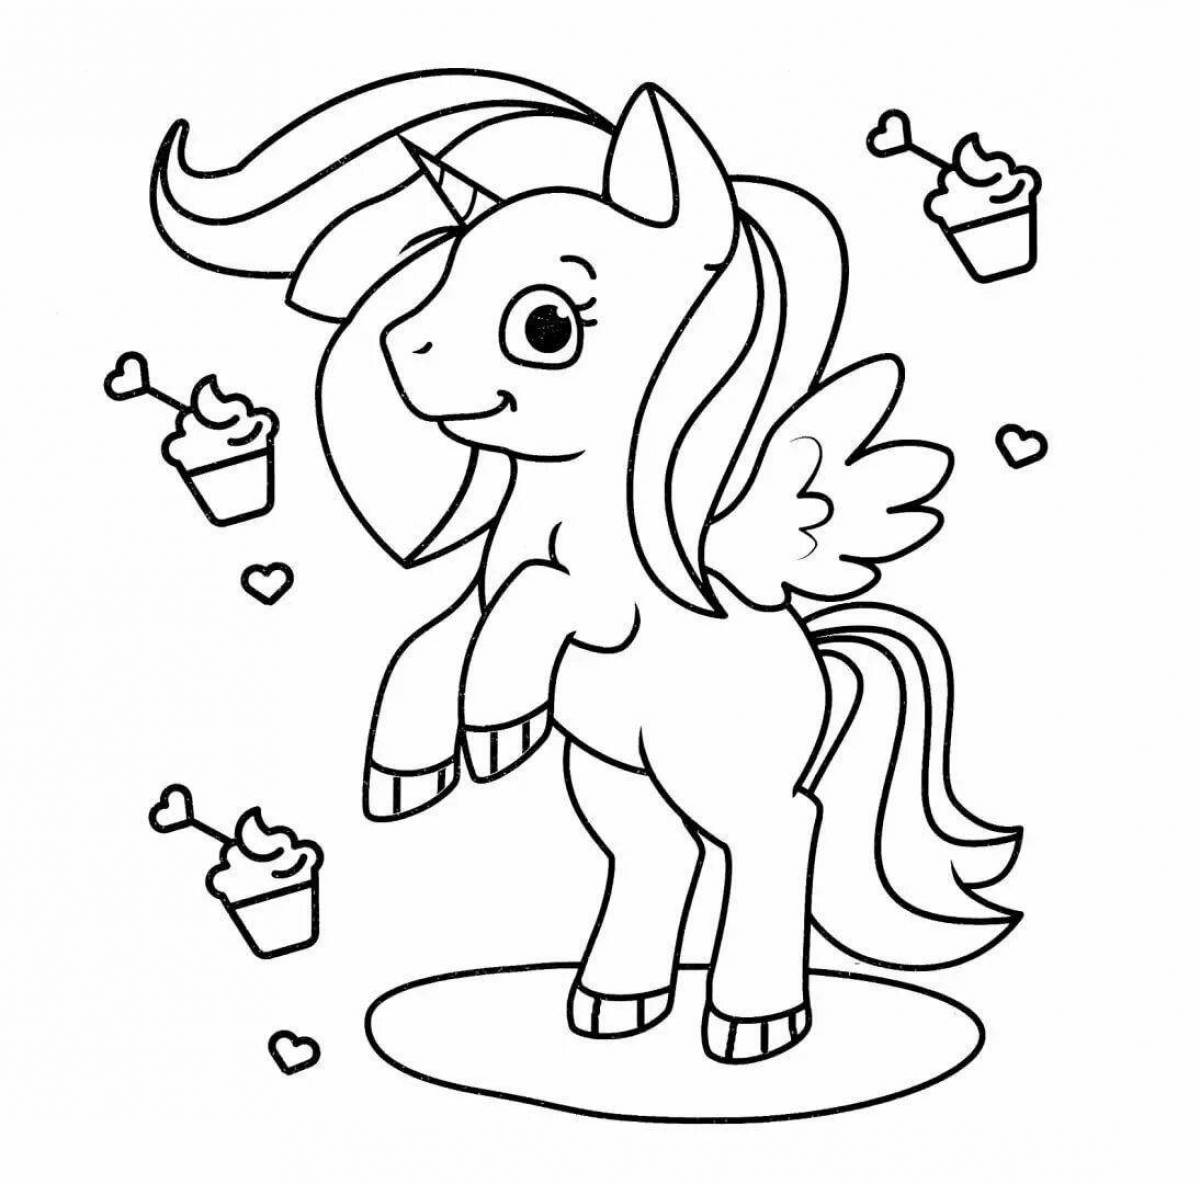 Sparkling coloring pages for 5-6 year olds for girls unicorns